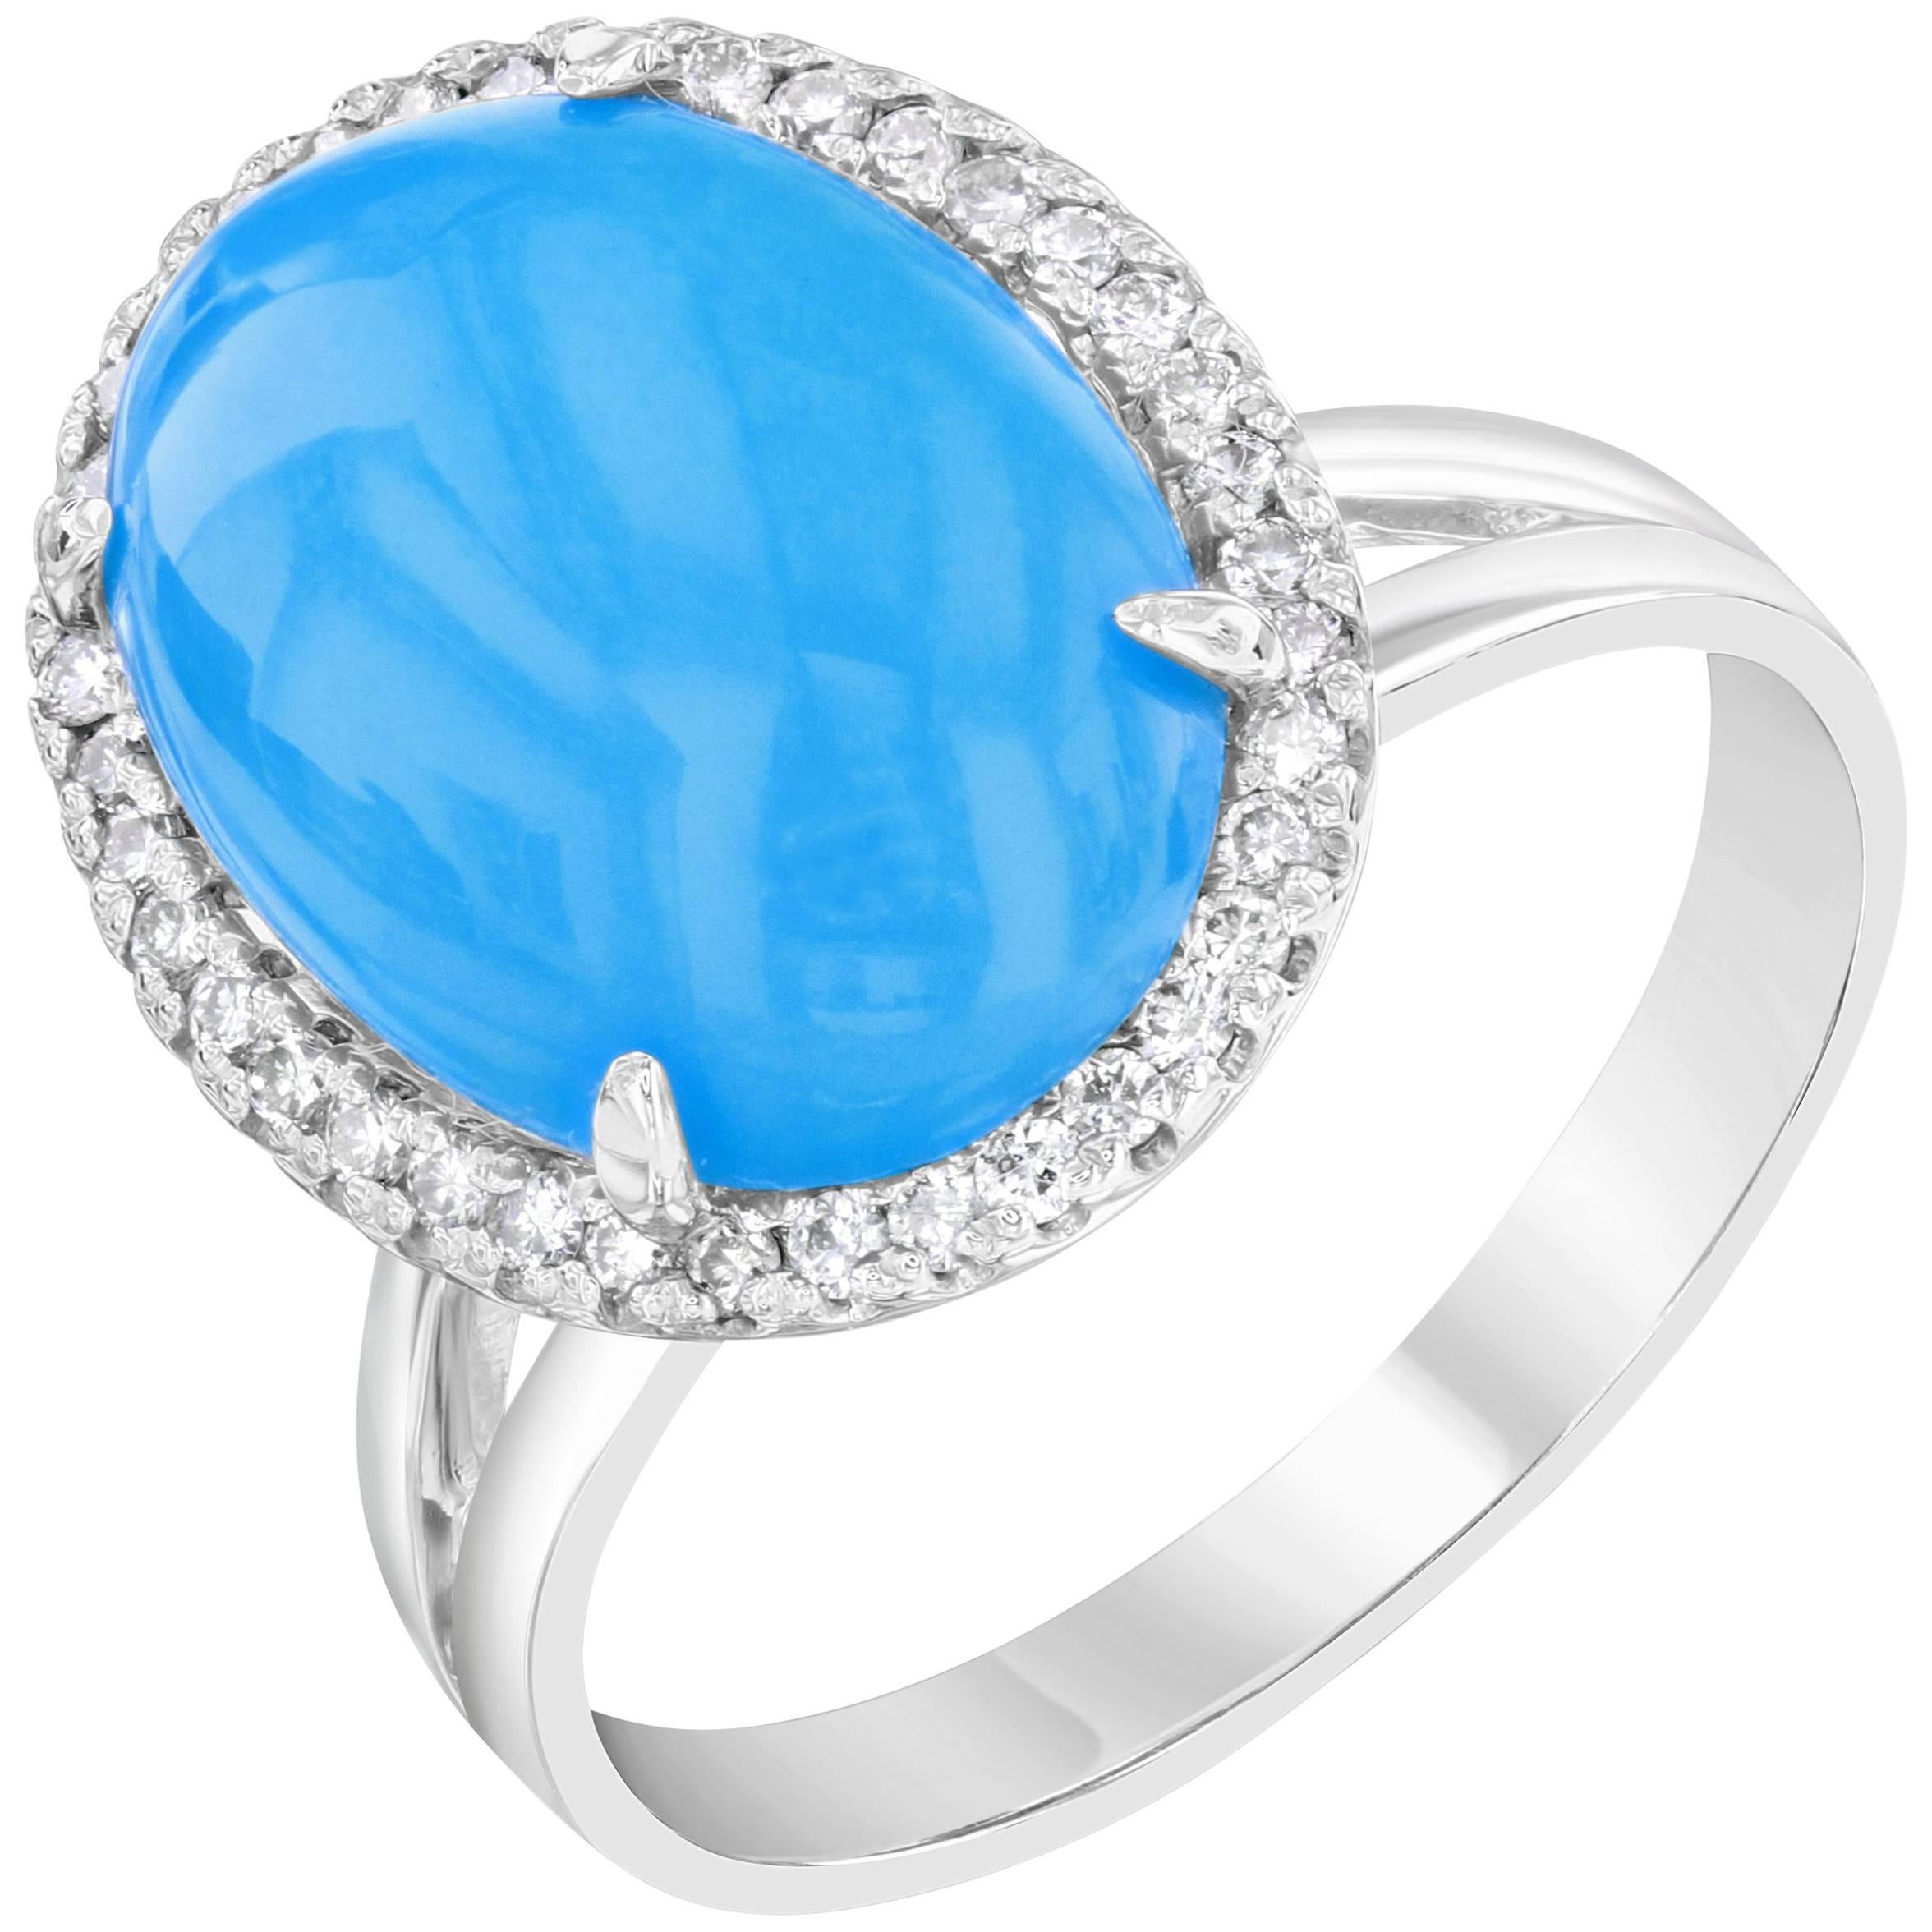 4.72 Carat Oval Cut Turquoise Diamond White Gold Cocktail Ring